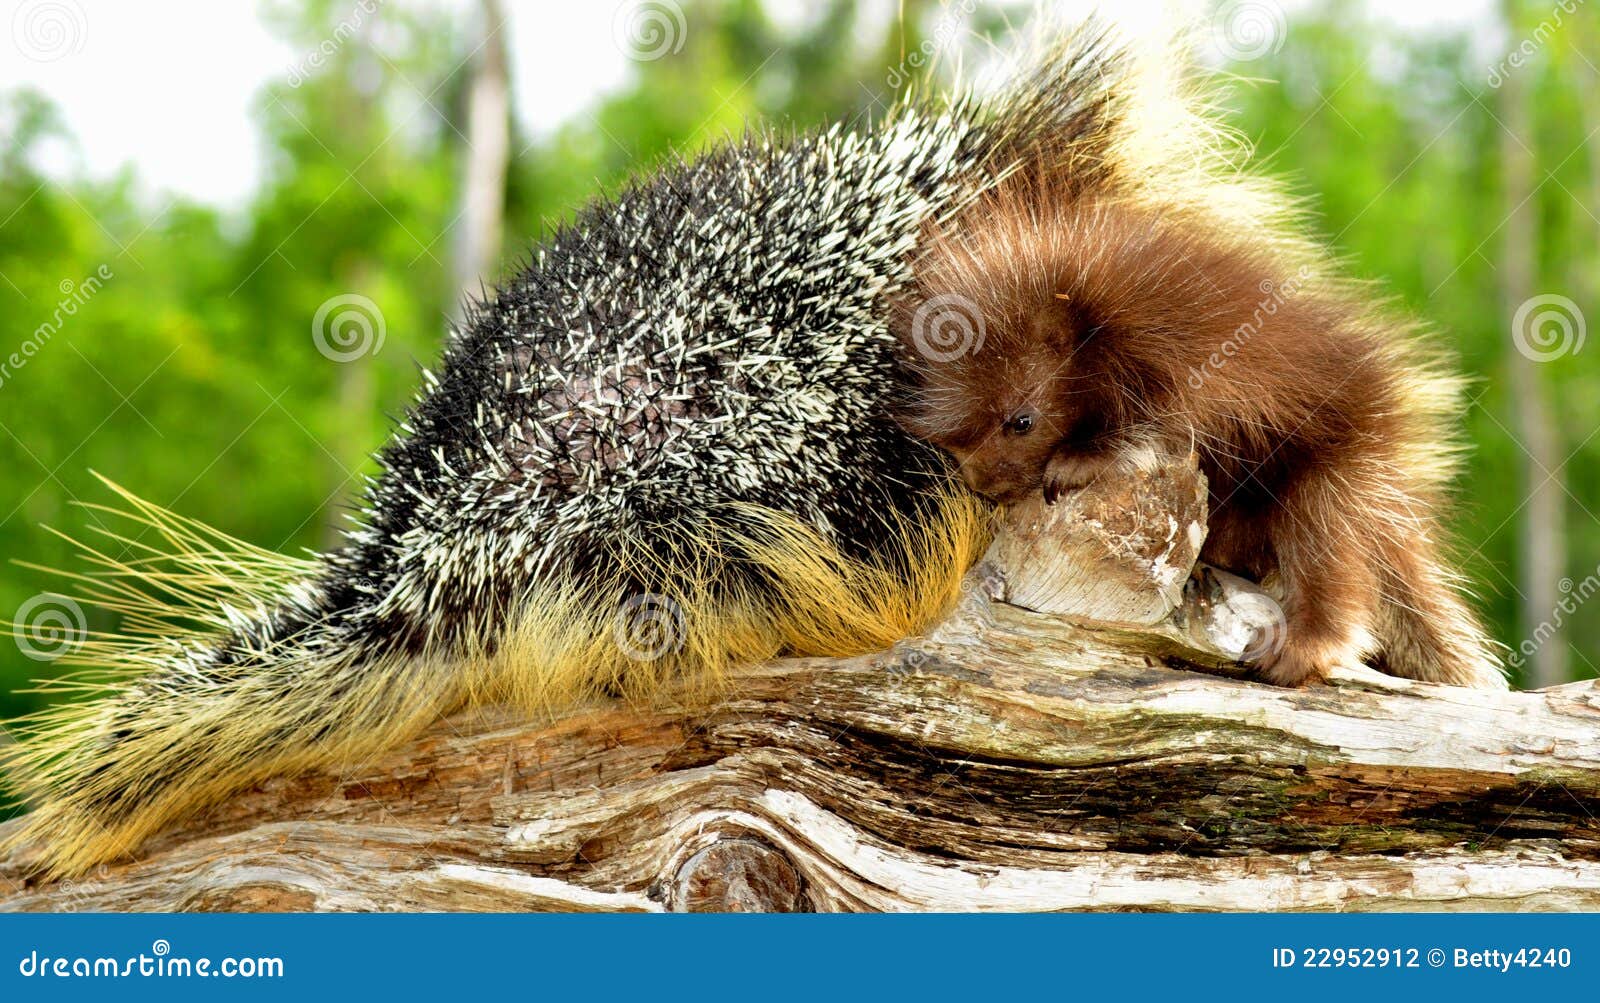 mother and baby porcupine cuddled.